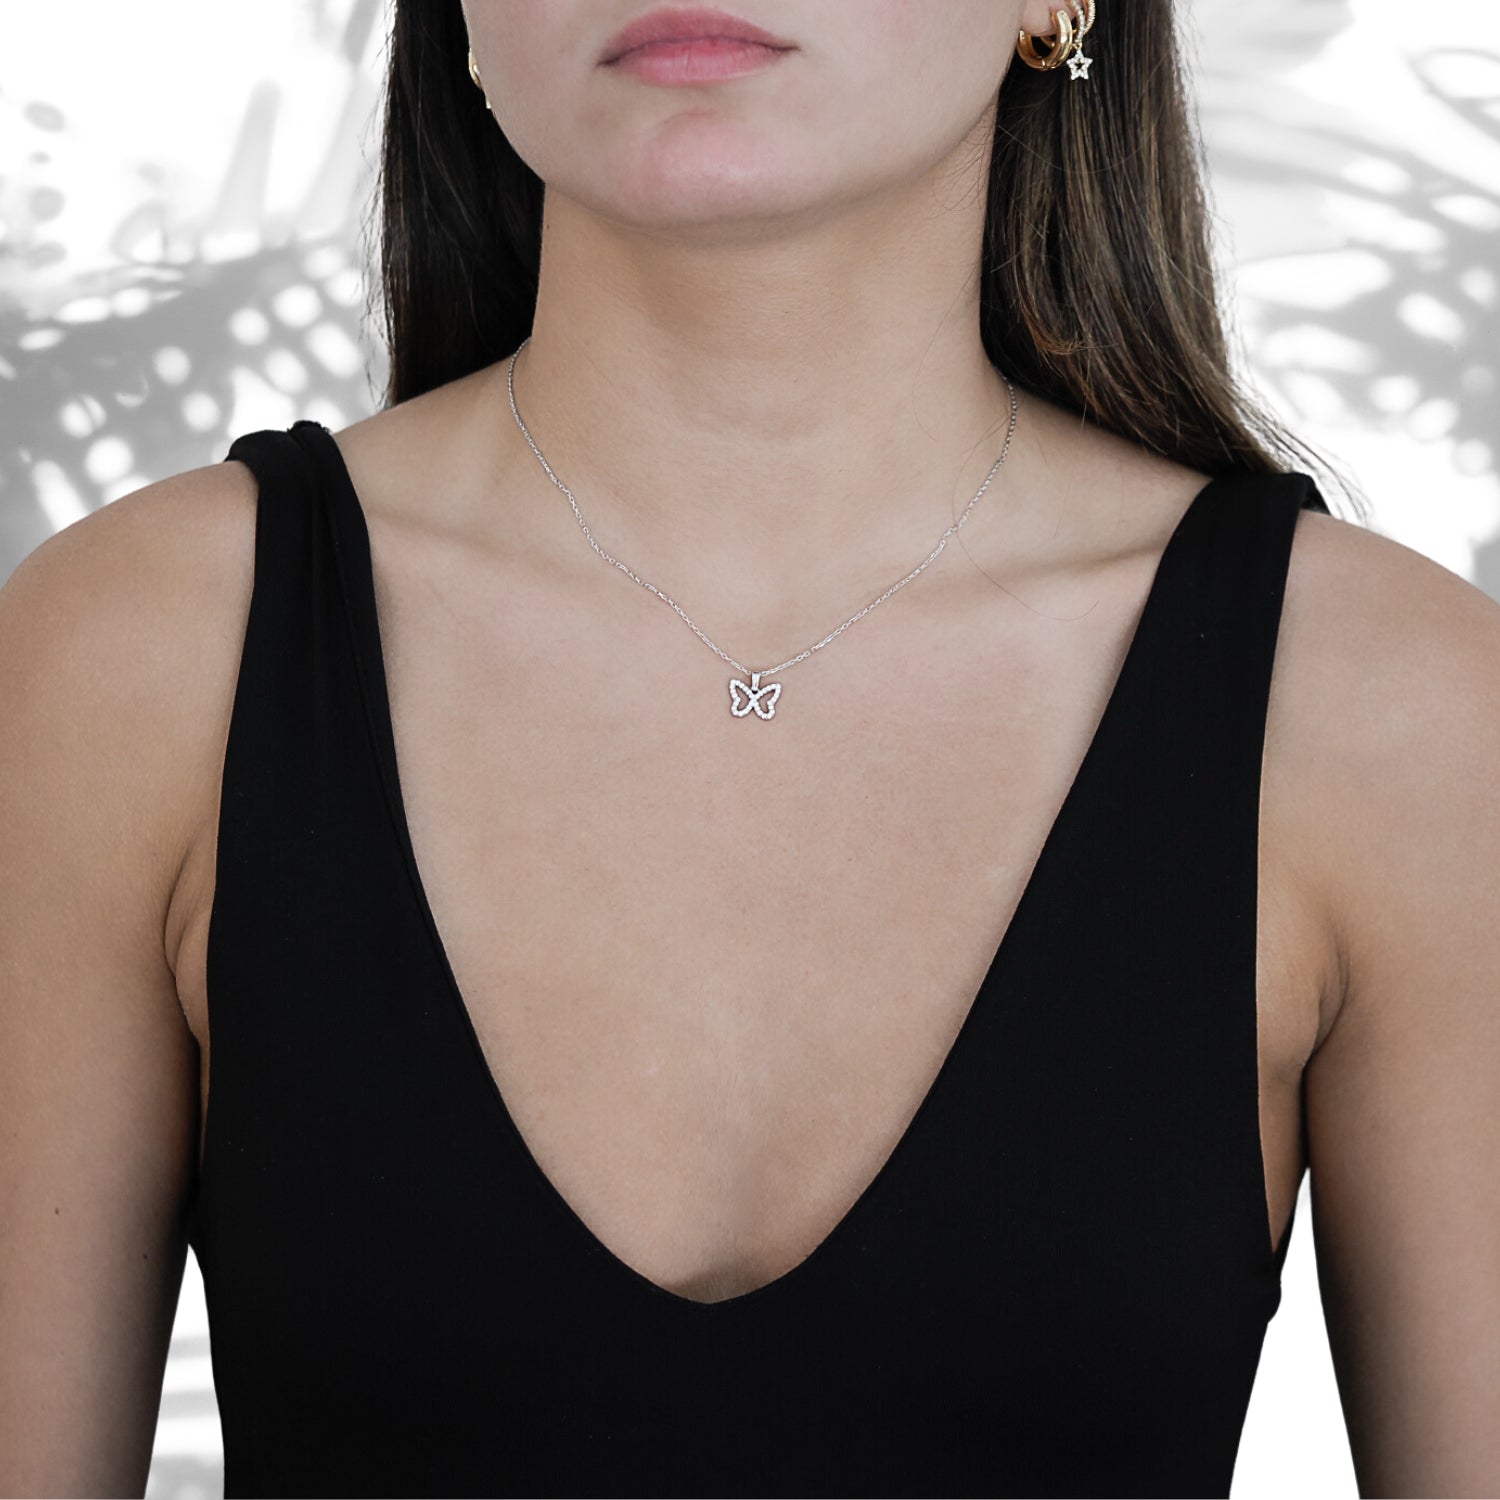 A model wearing the Silver Sparkly Butterfly Necklace, radiating elegance and grace.